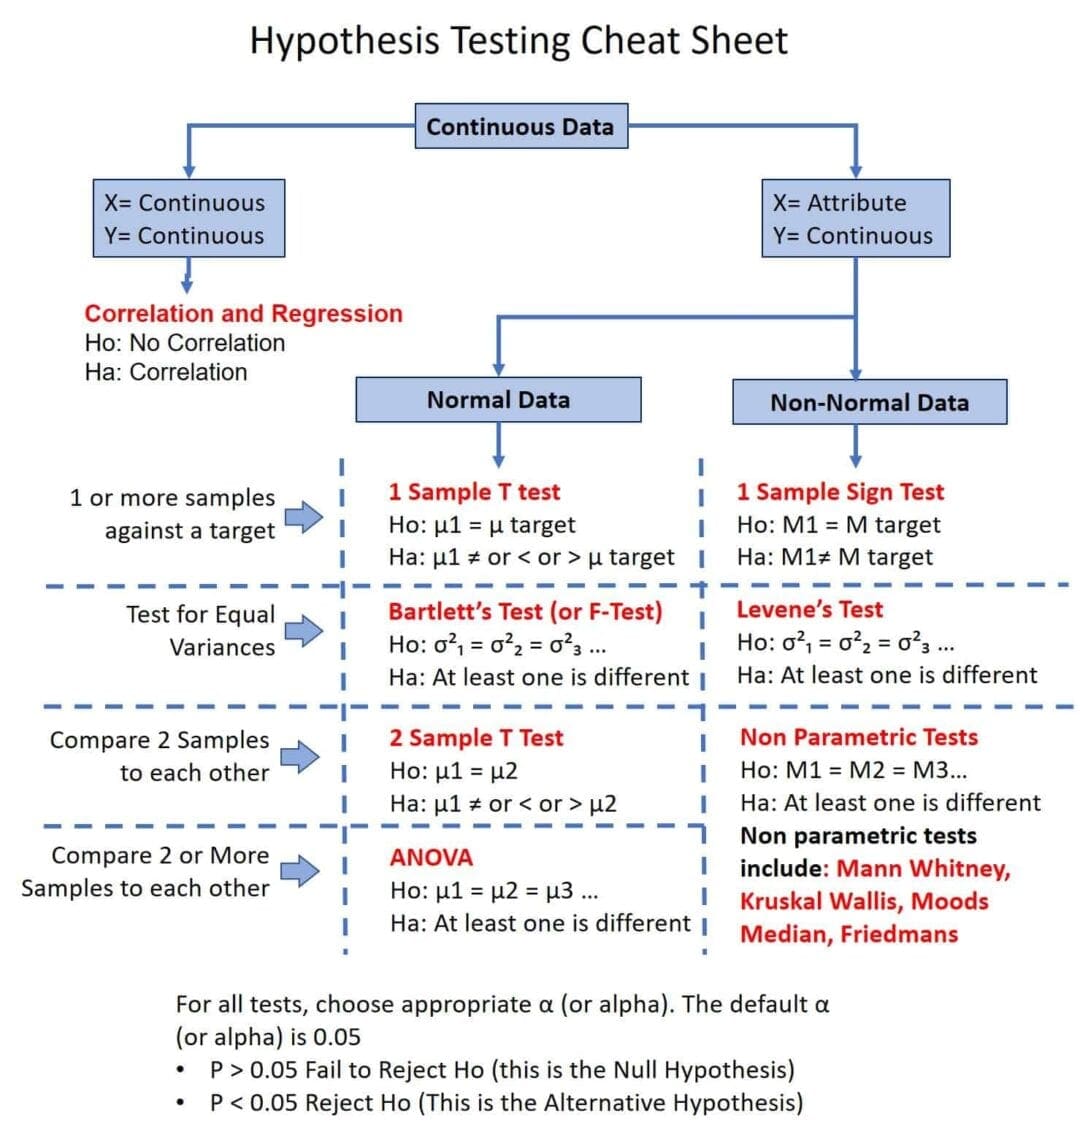 hypothesis test requirements